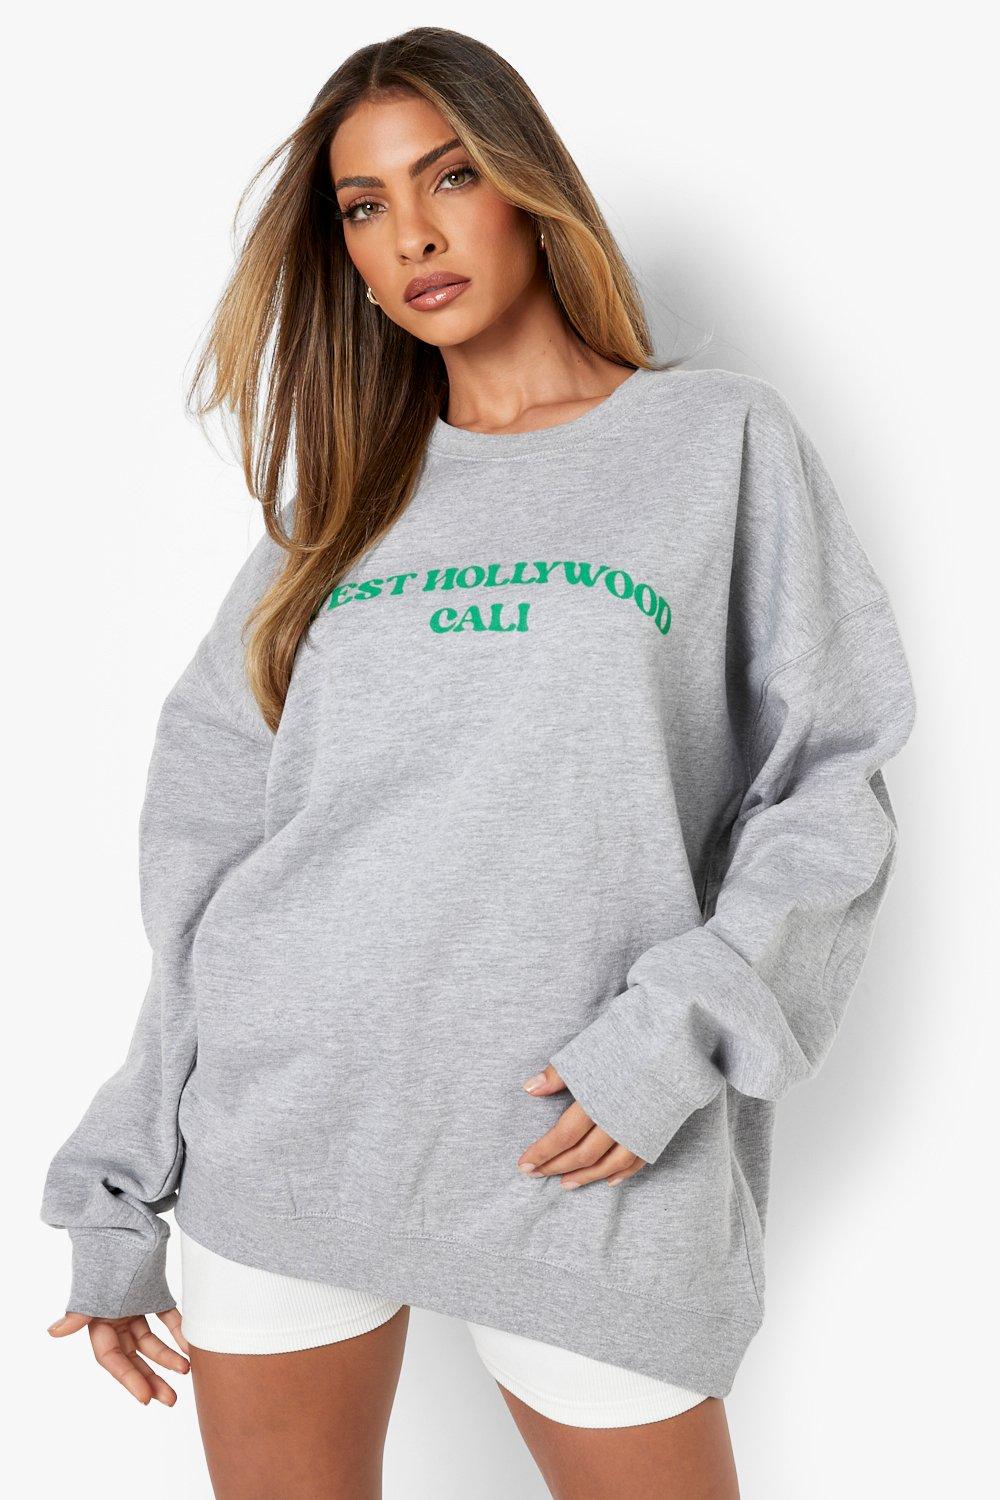 West Hollywood Printed Oversized Sweater, Grey